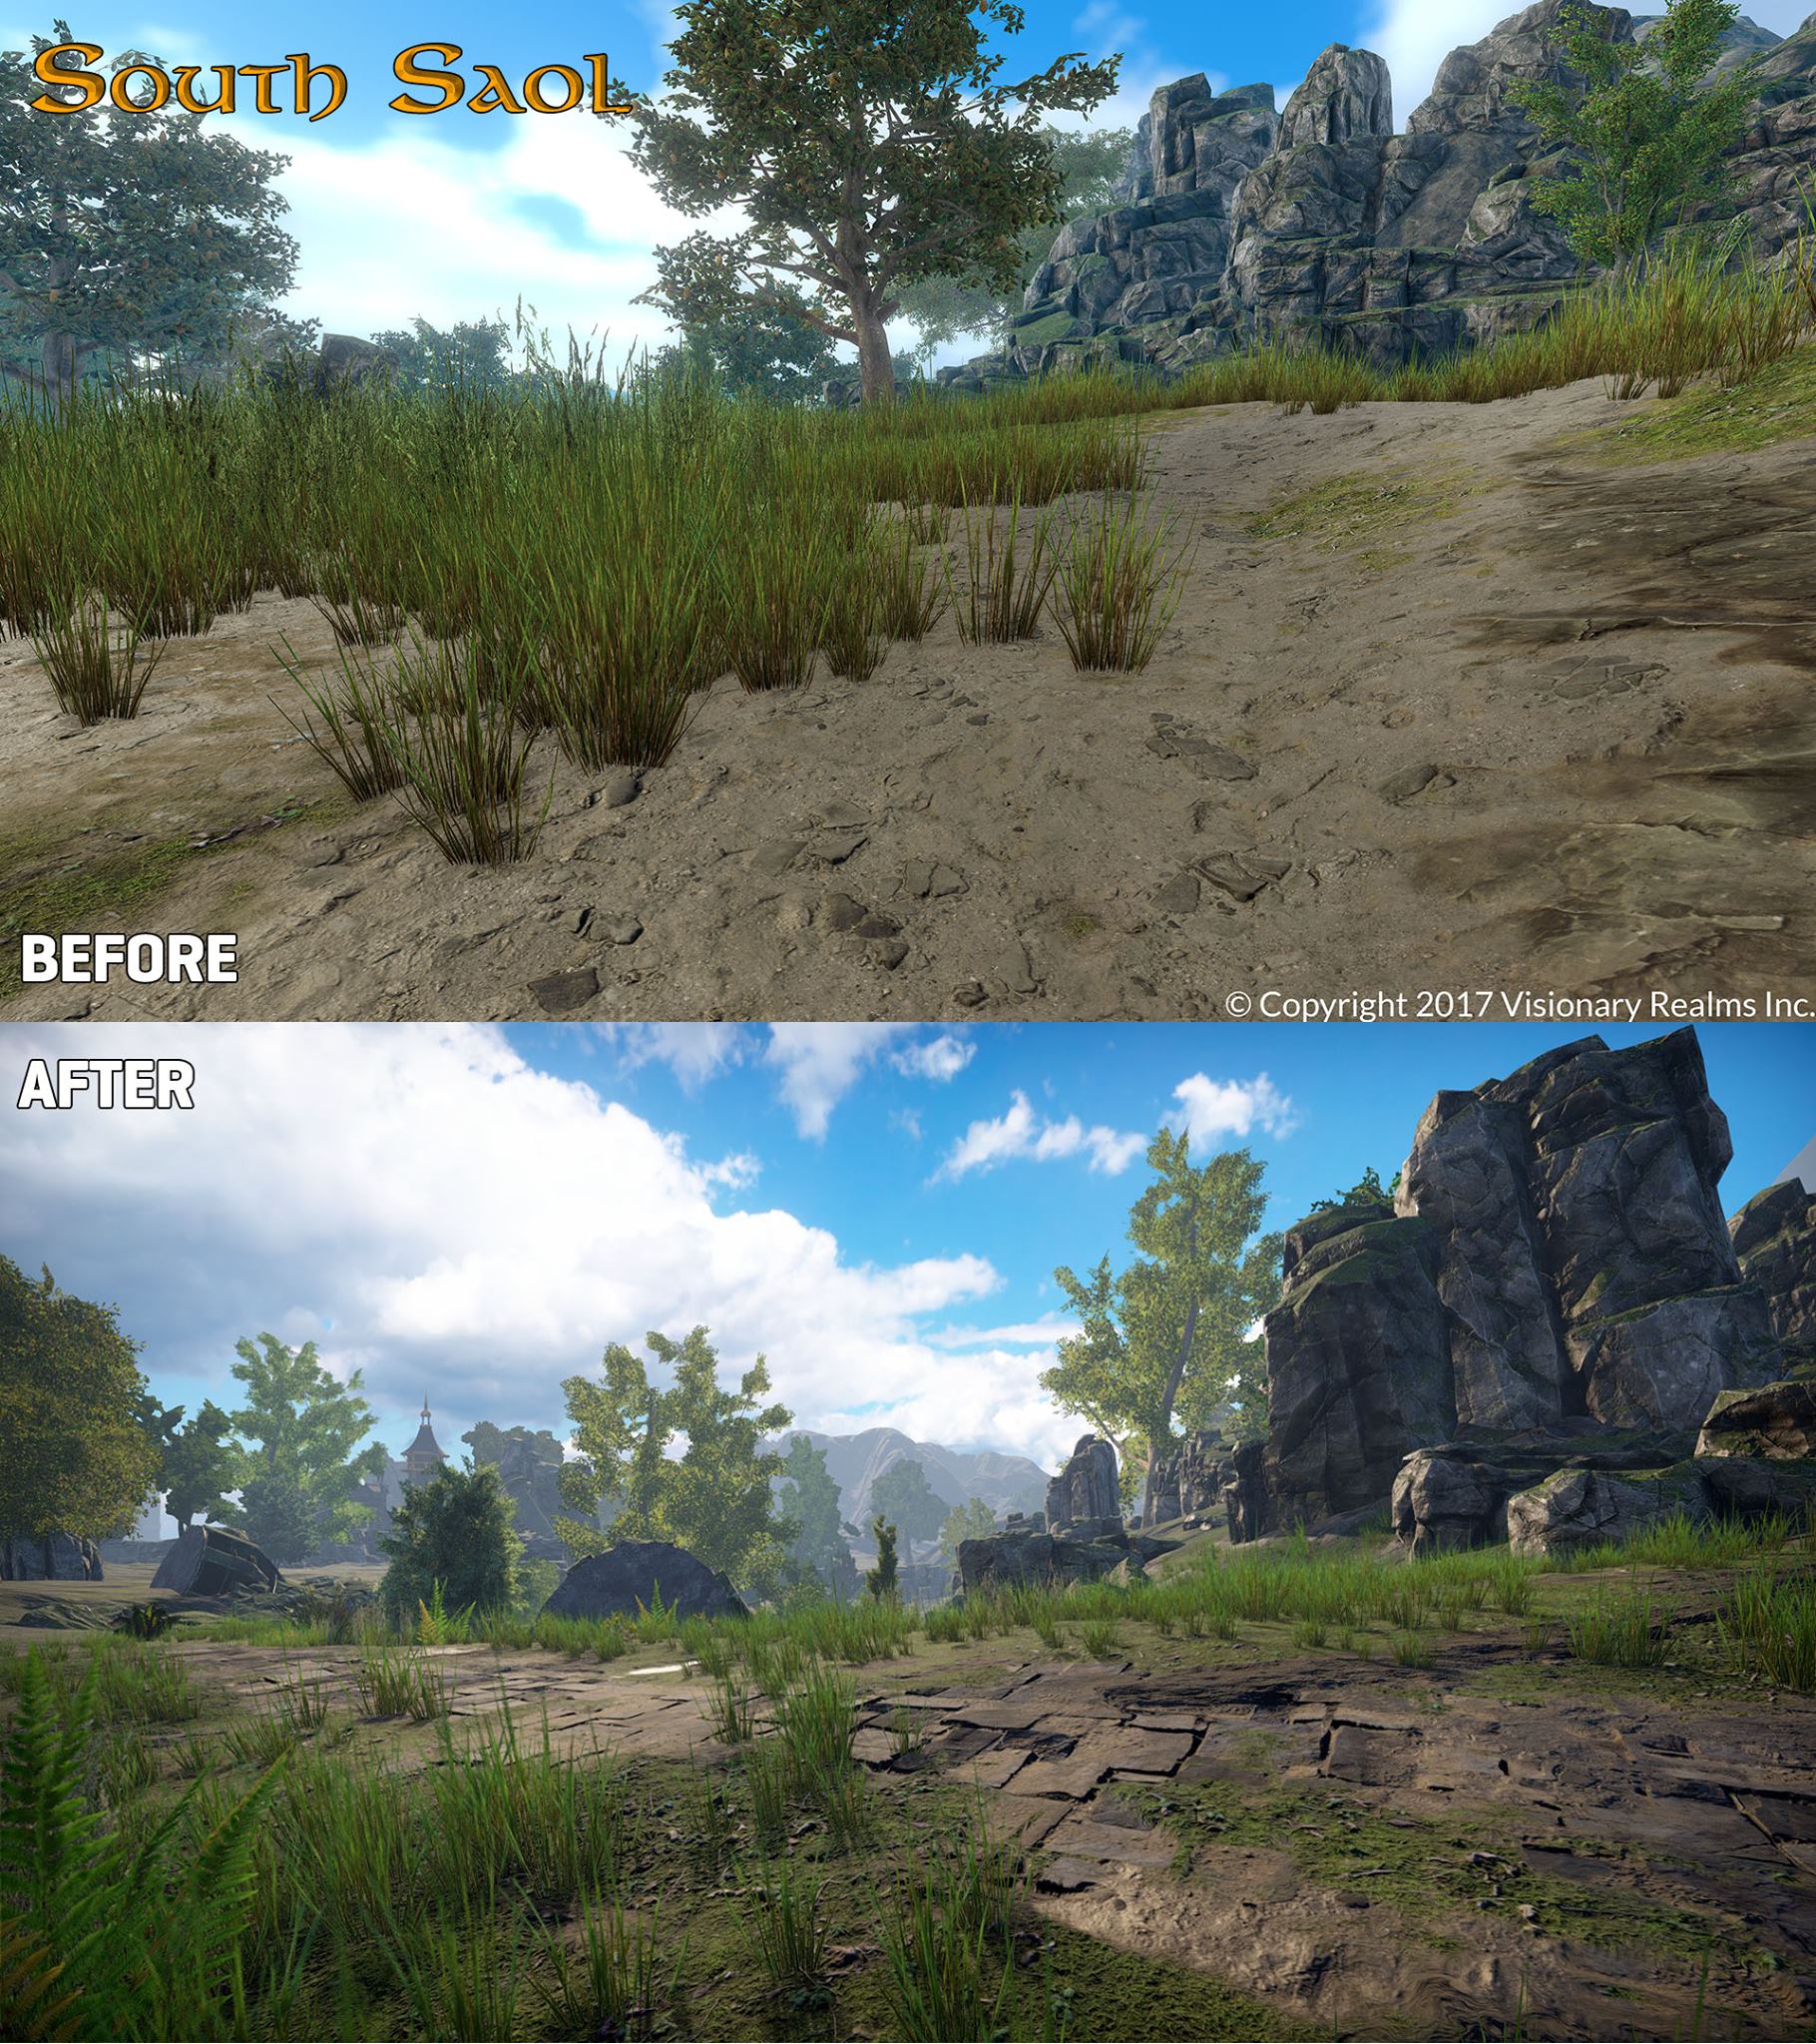 2017-Sep 13: Before-and-after screenshots of lighting changes in South Saol Peninsula